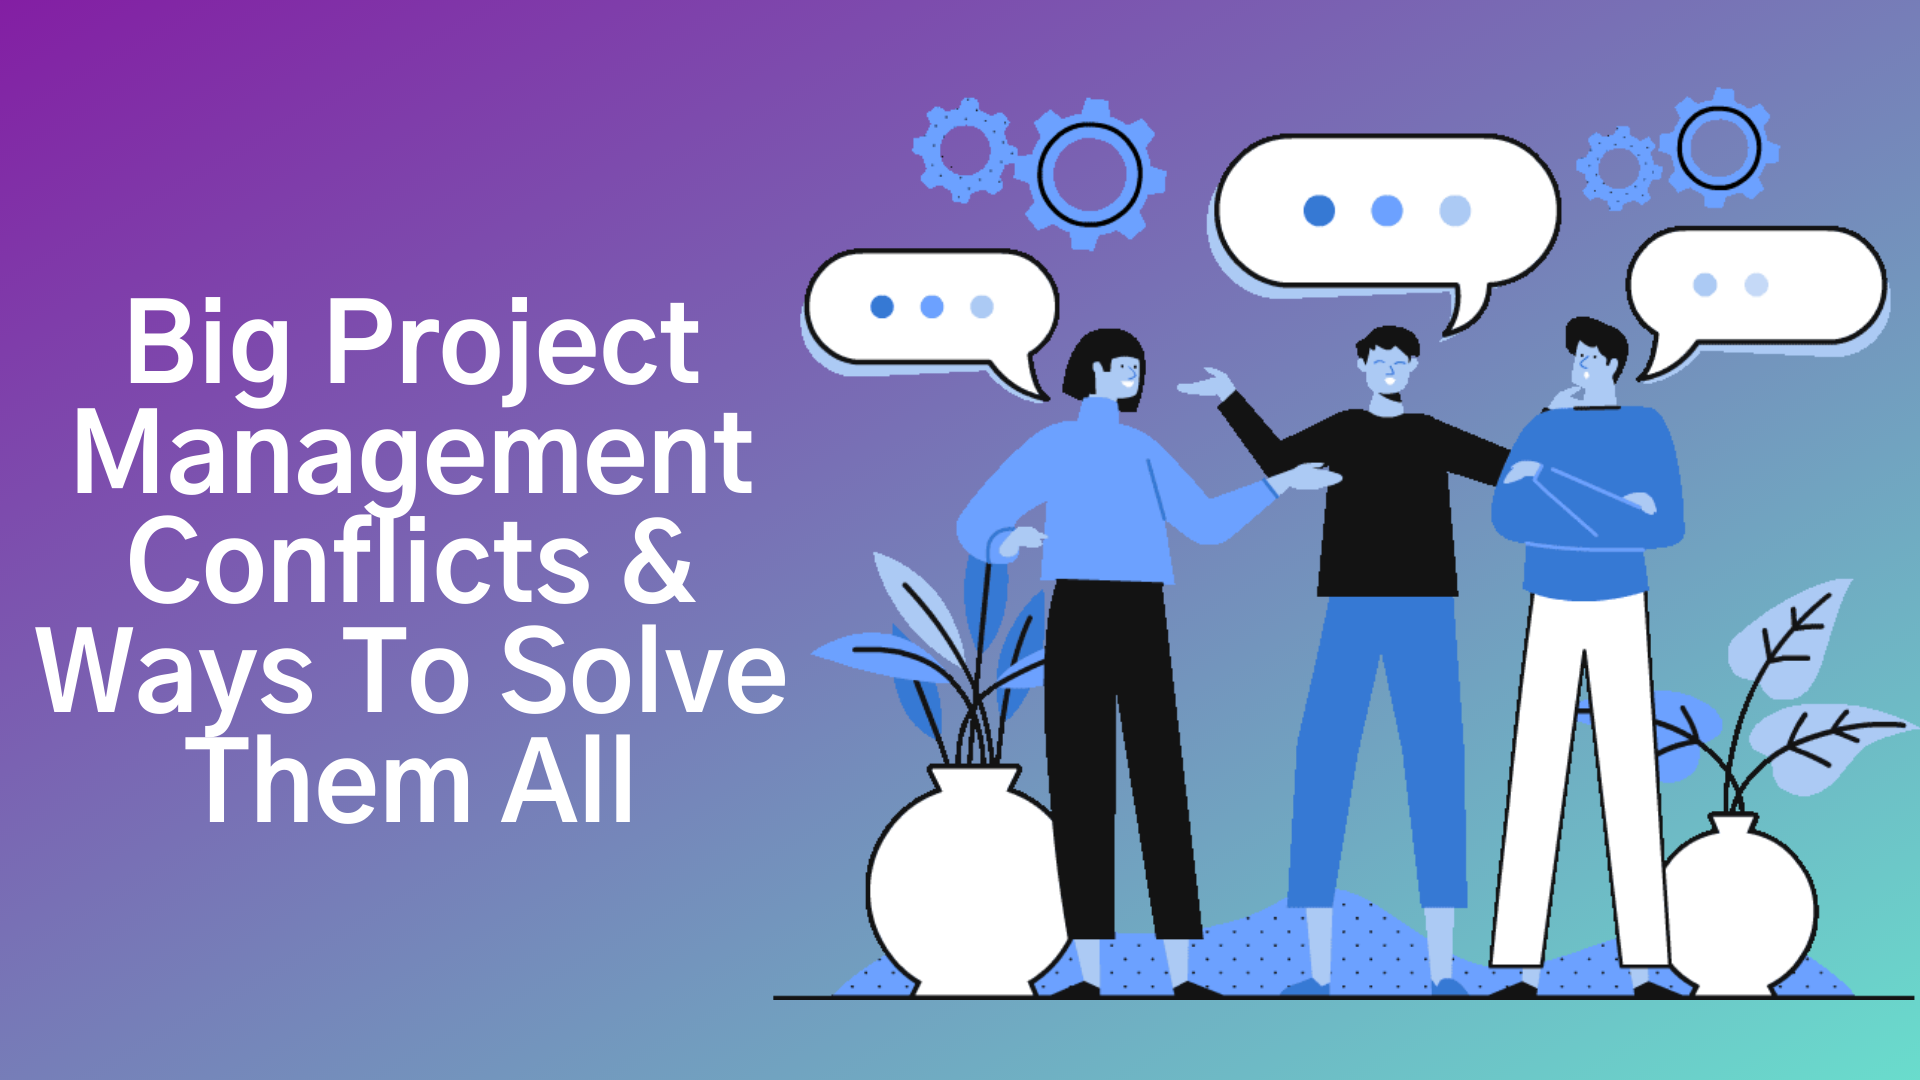 Project Management Conflicts & Ways To Solve Them All